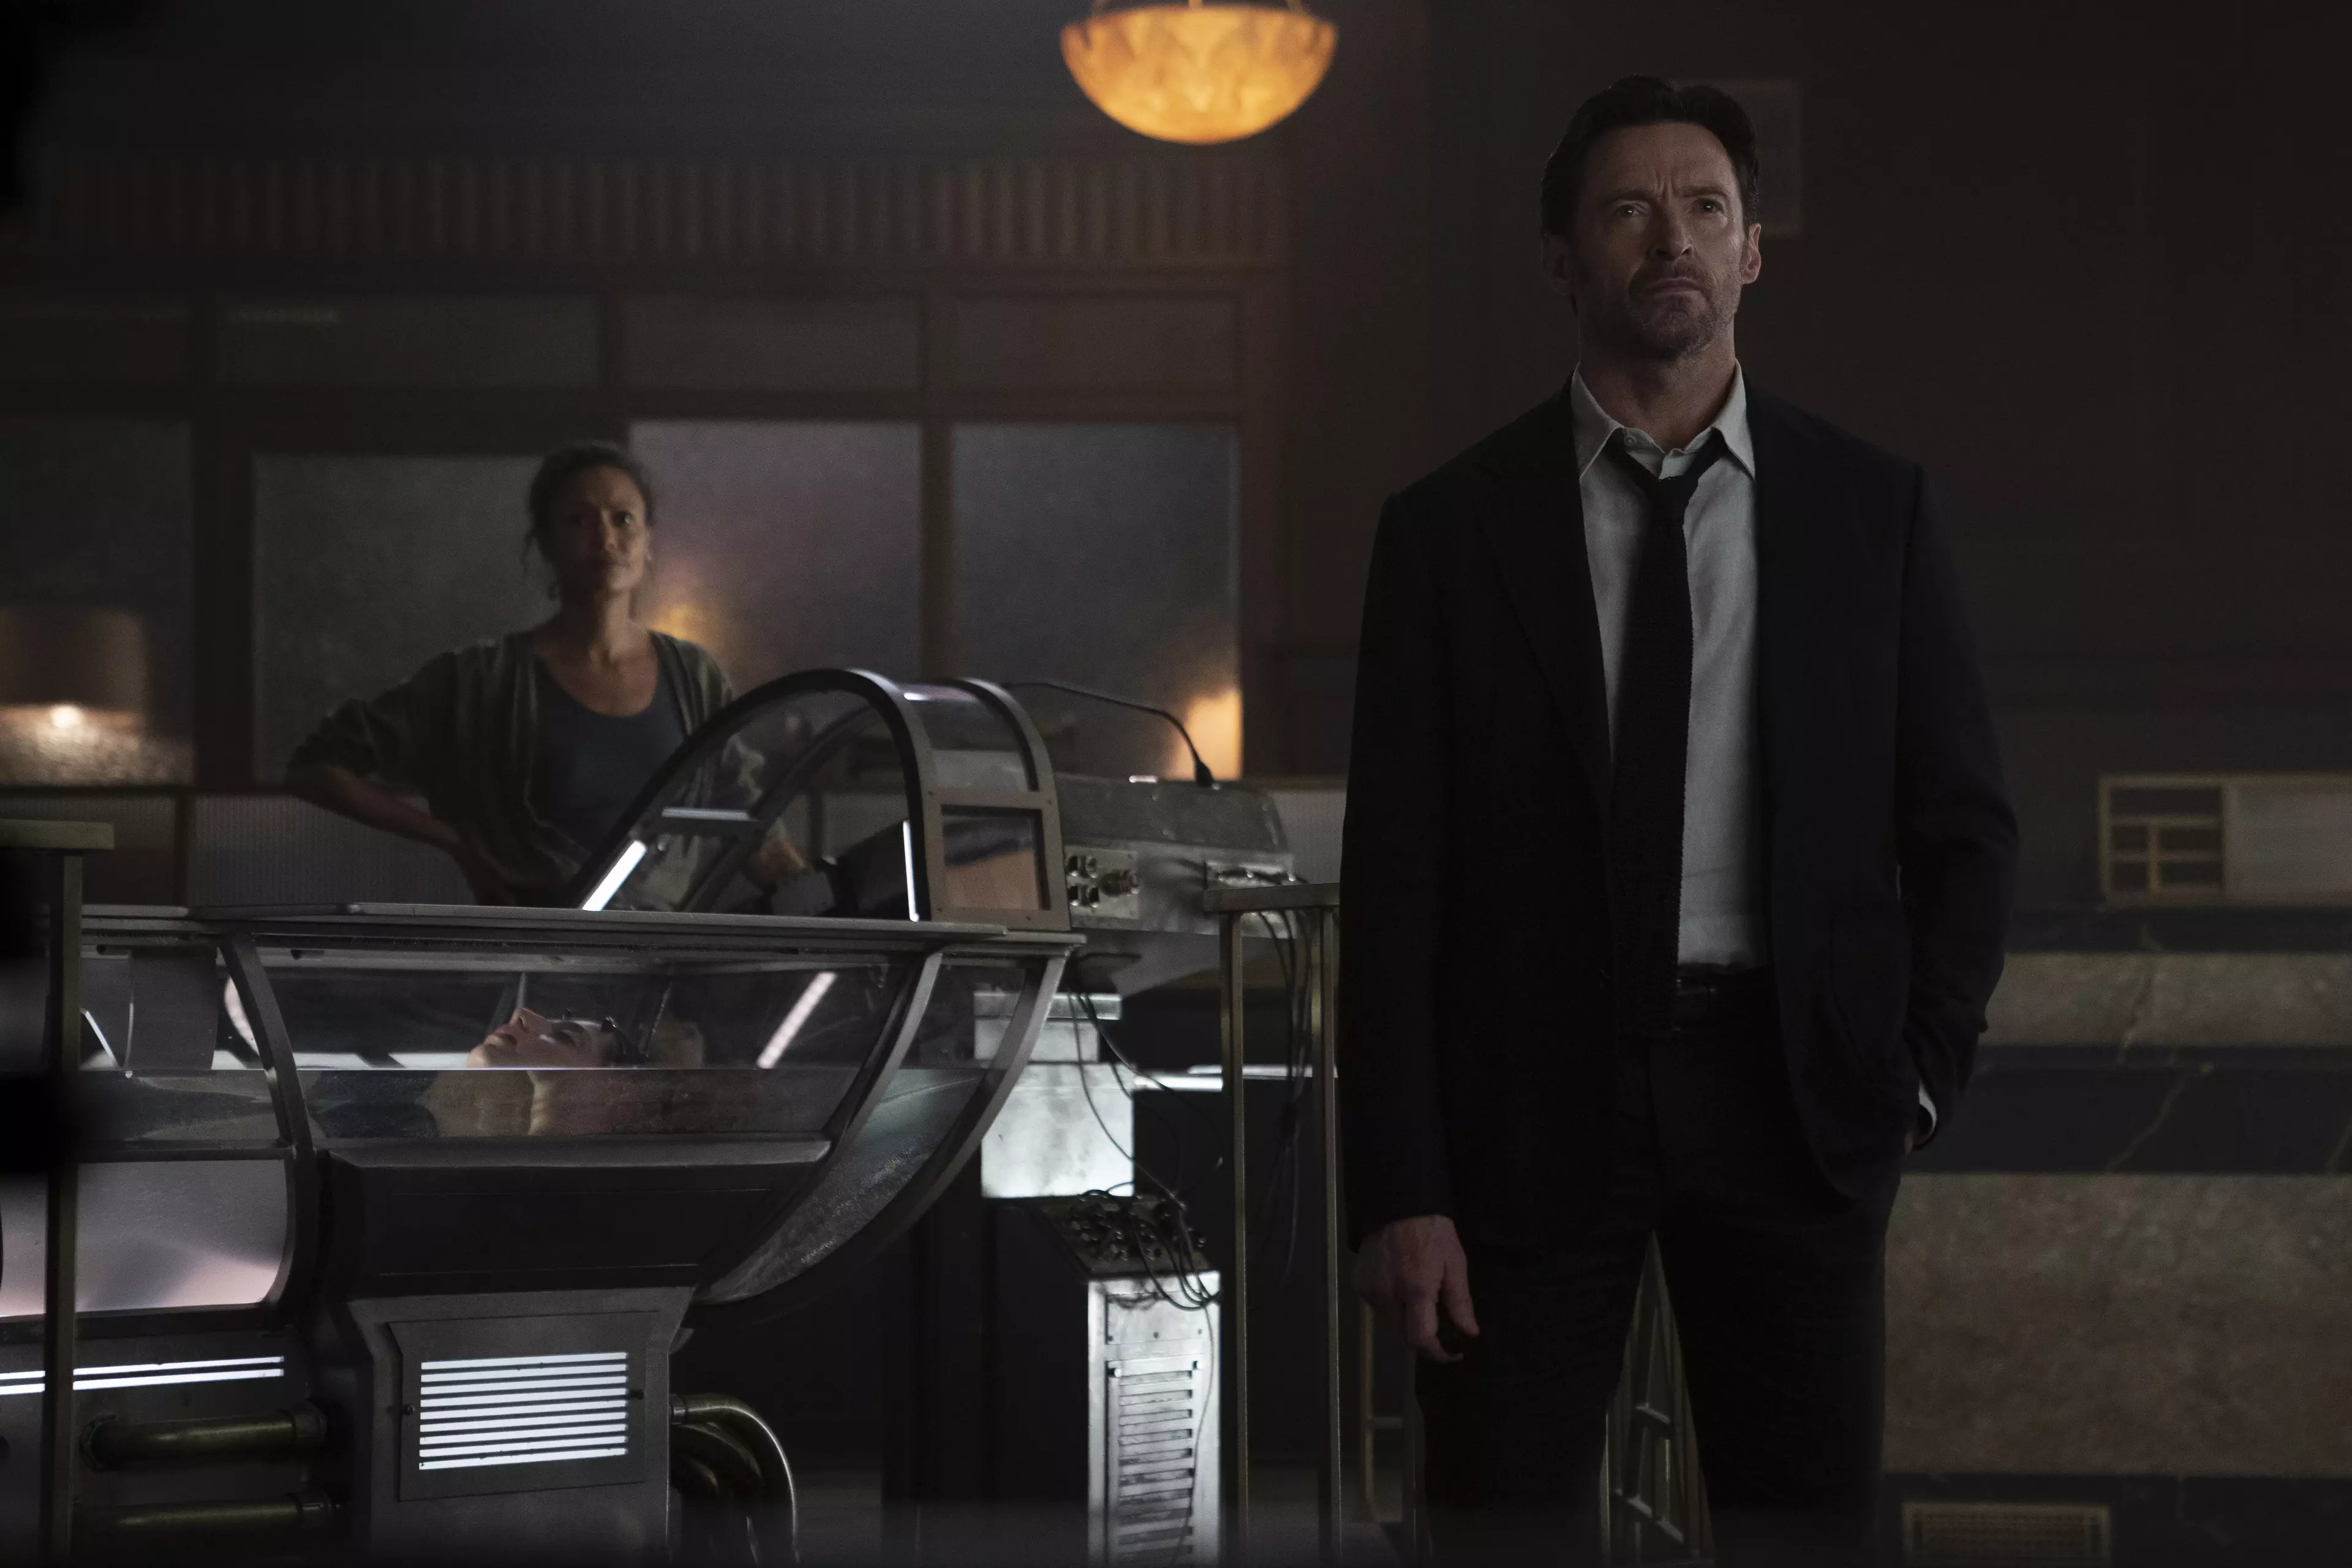 When not ripping Reynolds, Jackman has been working on new sci-fi movie Reminiscence.